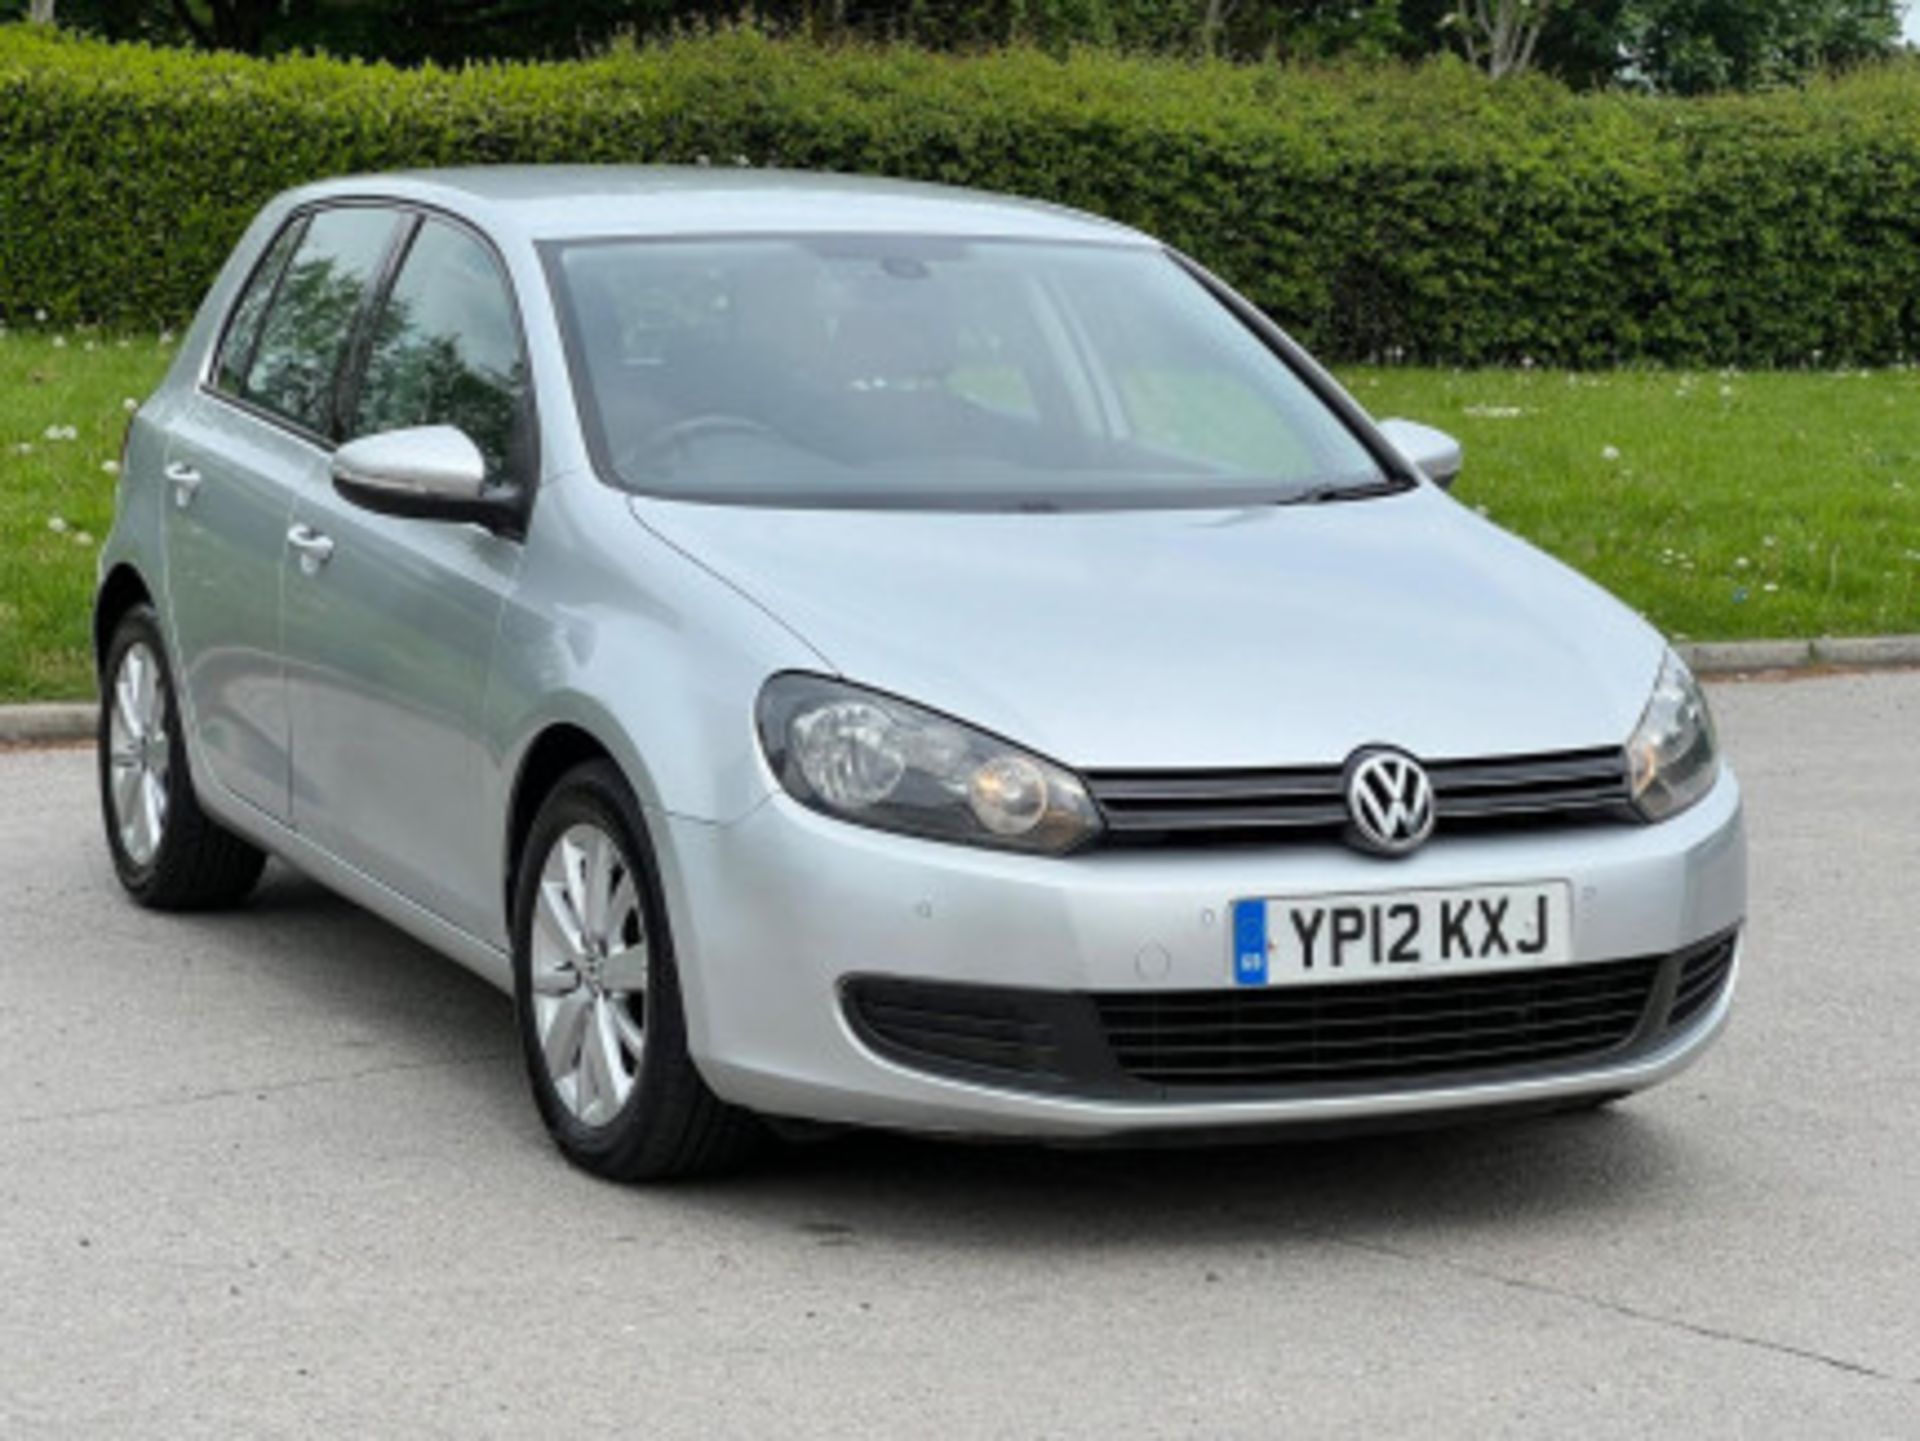 IMPECCABLE 2012 VOLKSWAGEN GOLF 1.6 TDI MATCH >>--NO VAT ON HAMMER--<< - Image 59 of 116